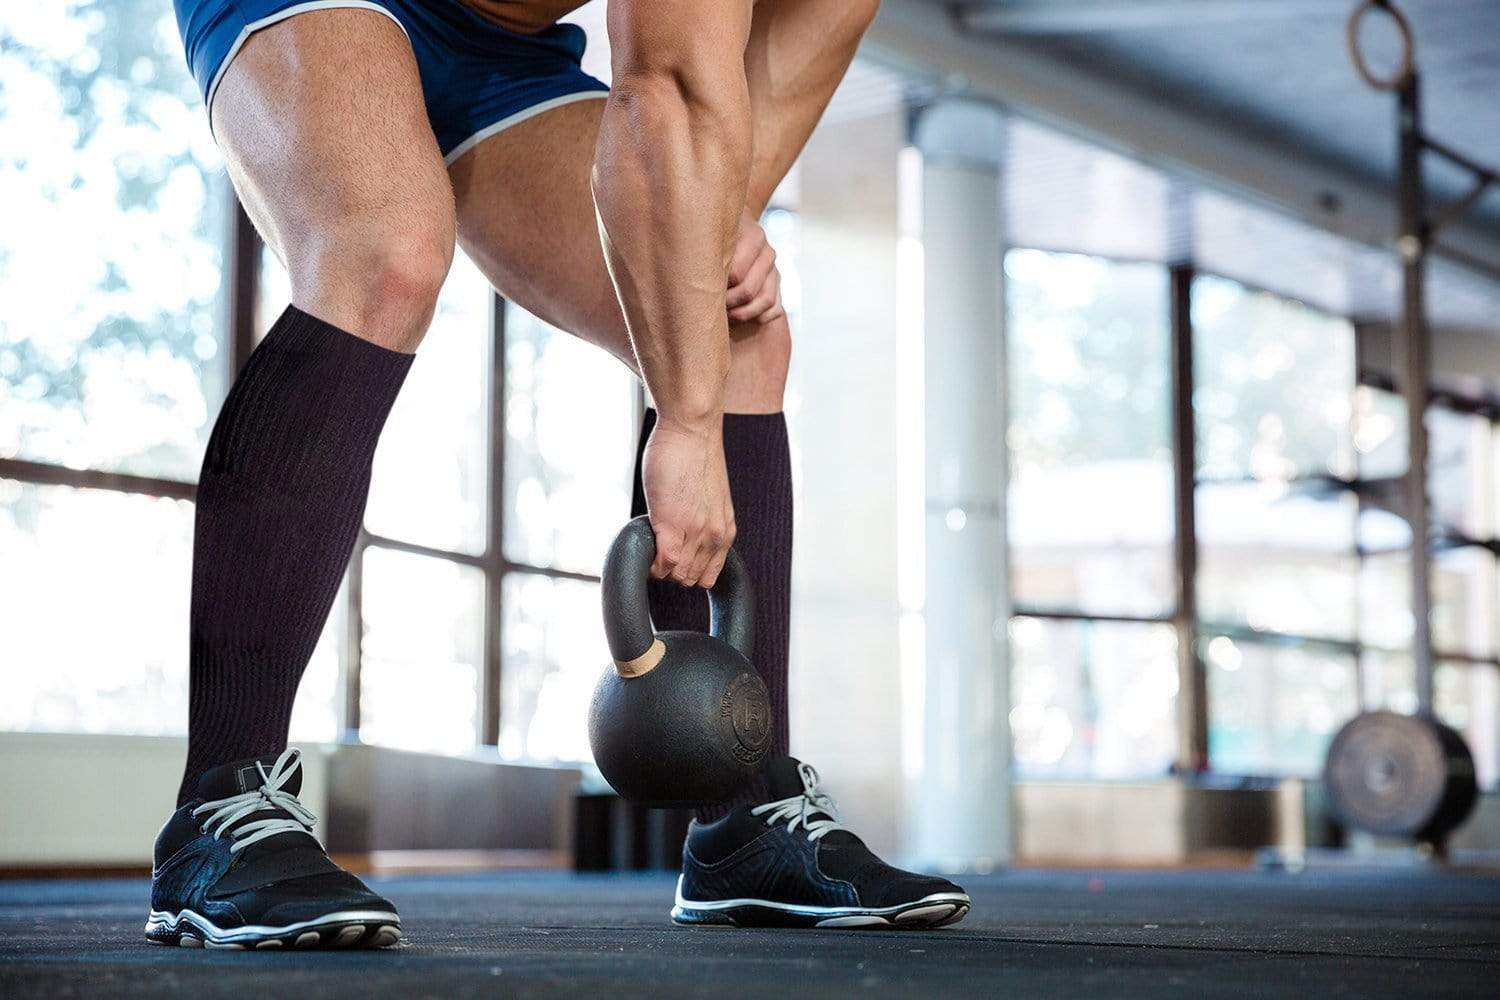 Copper Compression Socks will help your workouts tremendously, allowing you to exert more energy due to the fact that your legs will be able to handle with the Copper Infused Socks